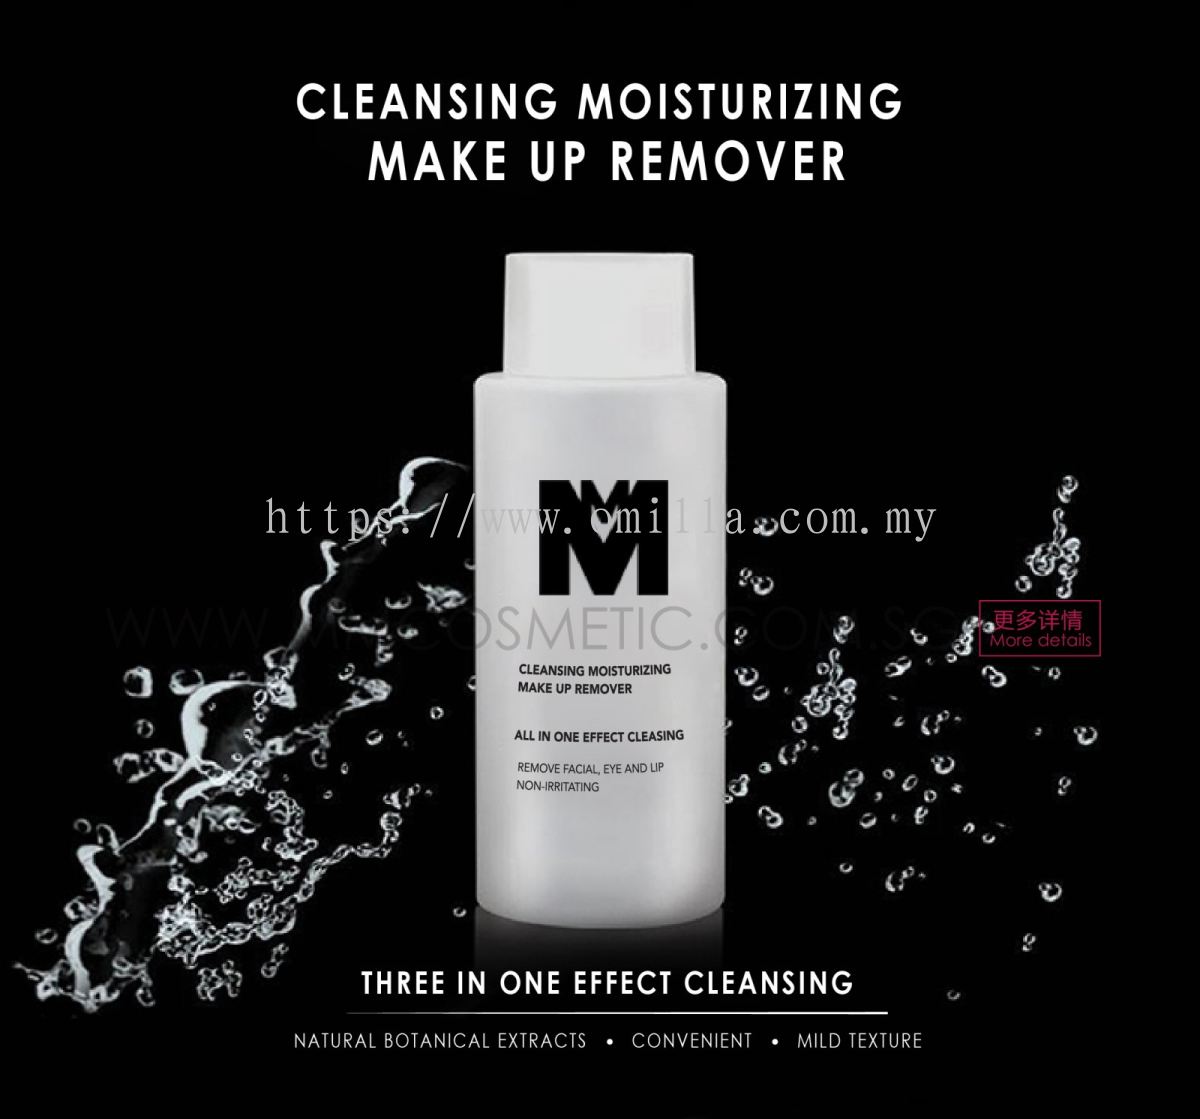 MM COSMETIC SDN BHD:Cleansing Moisturizing Make Up Remover